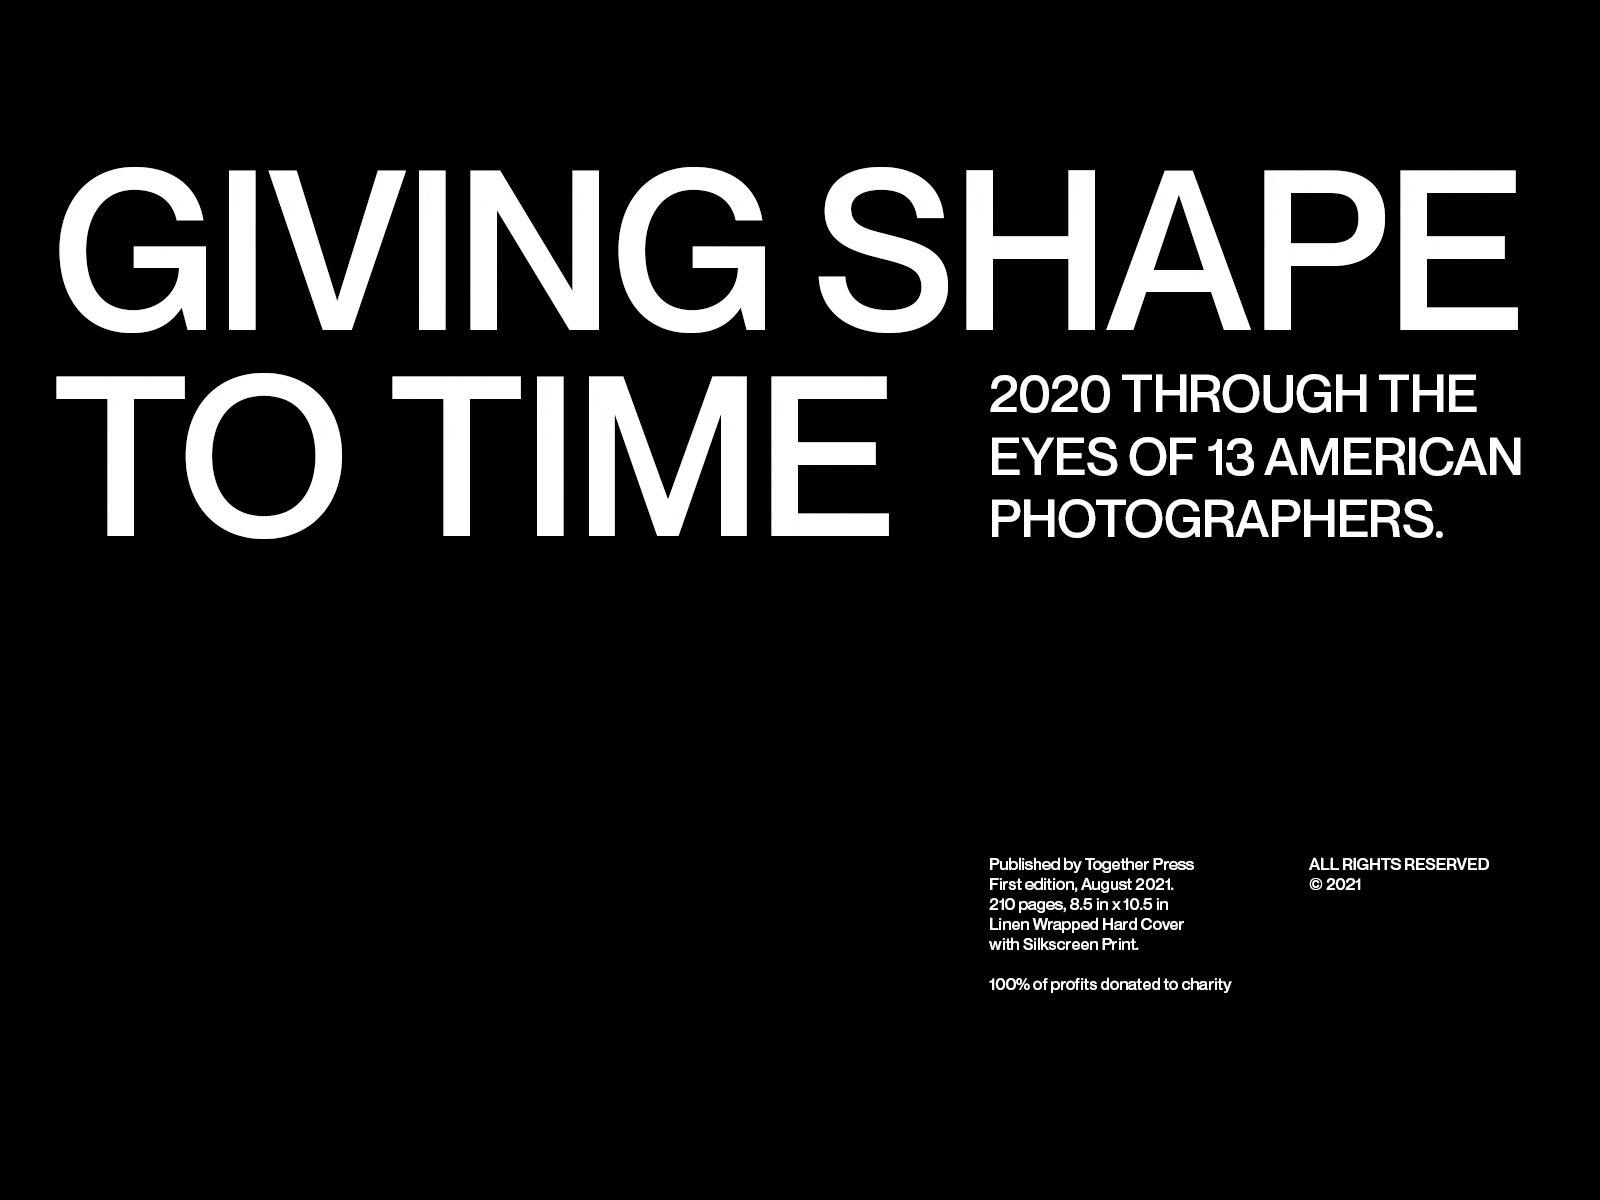 GIVING SHAPE TO TIME